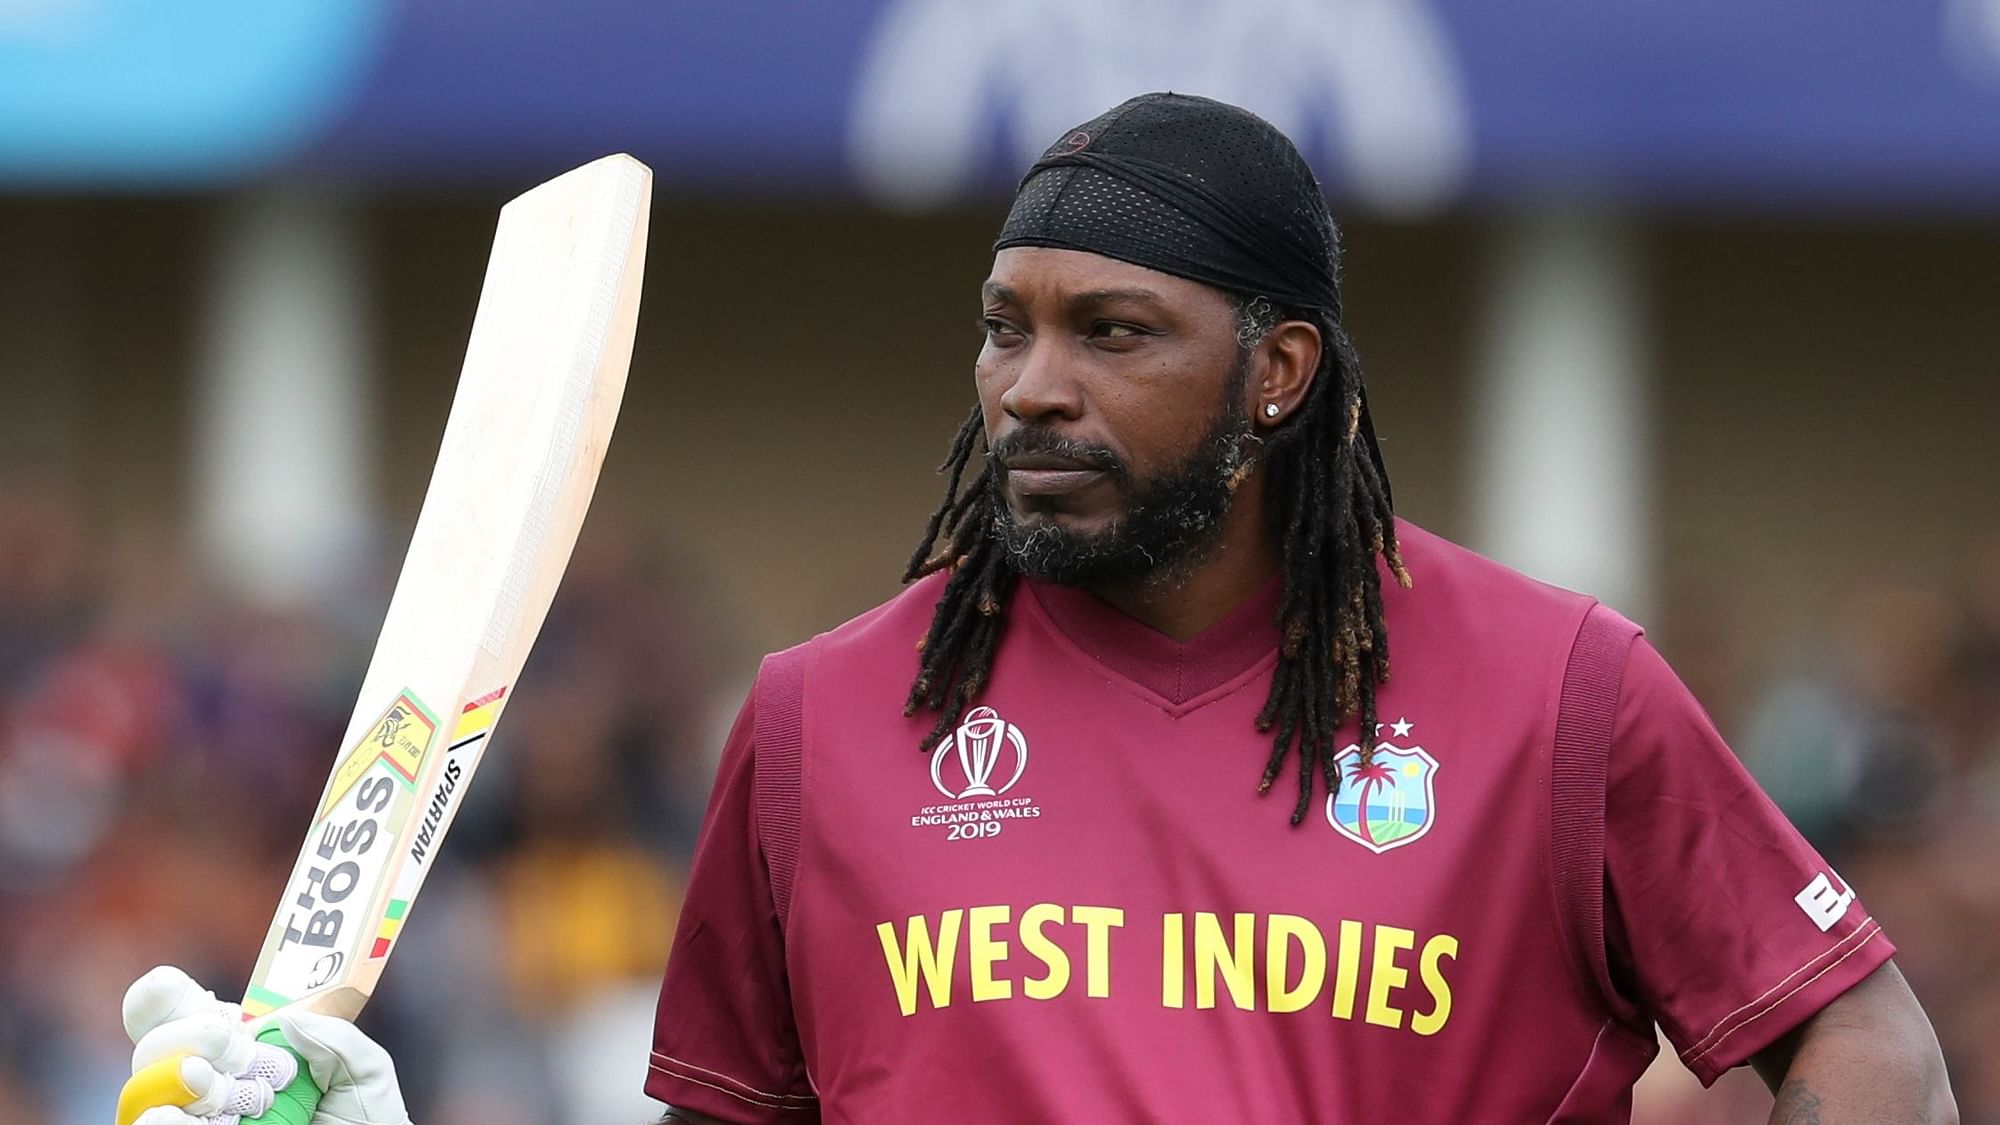 Chris Gayle scored his 22nd T20 hundred against St Kitts and Nevis Patriots in a high-scoring Carribean Premier League game.